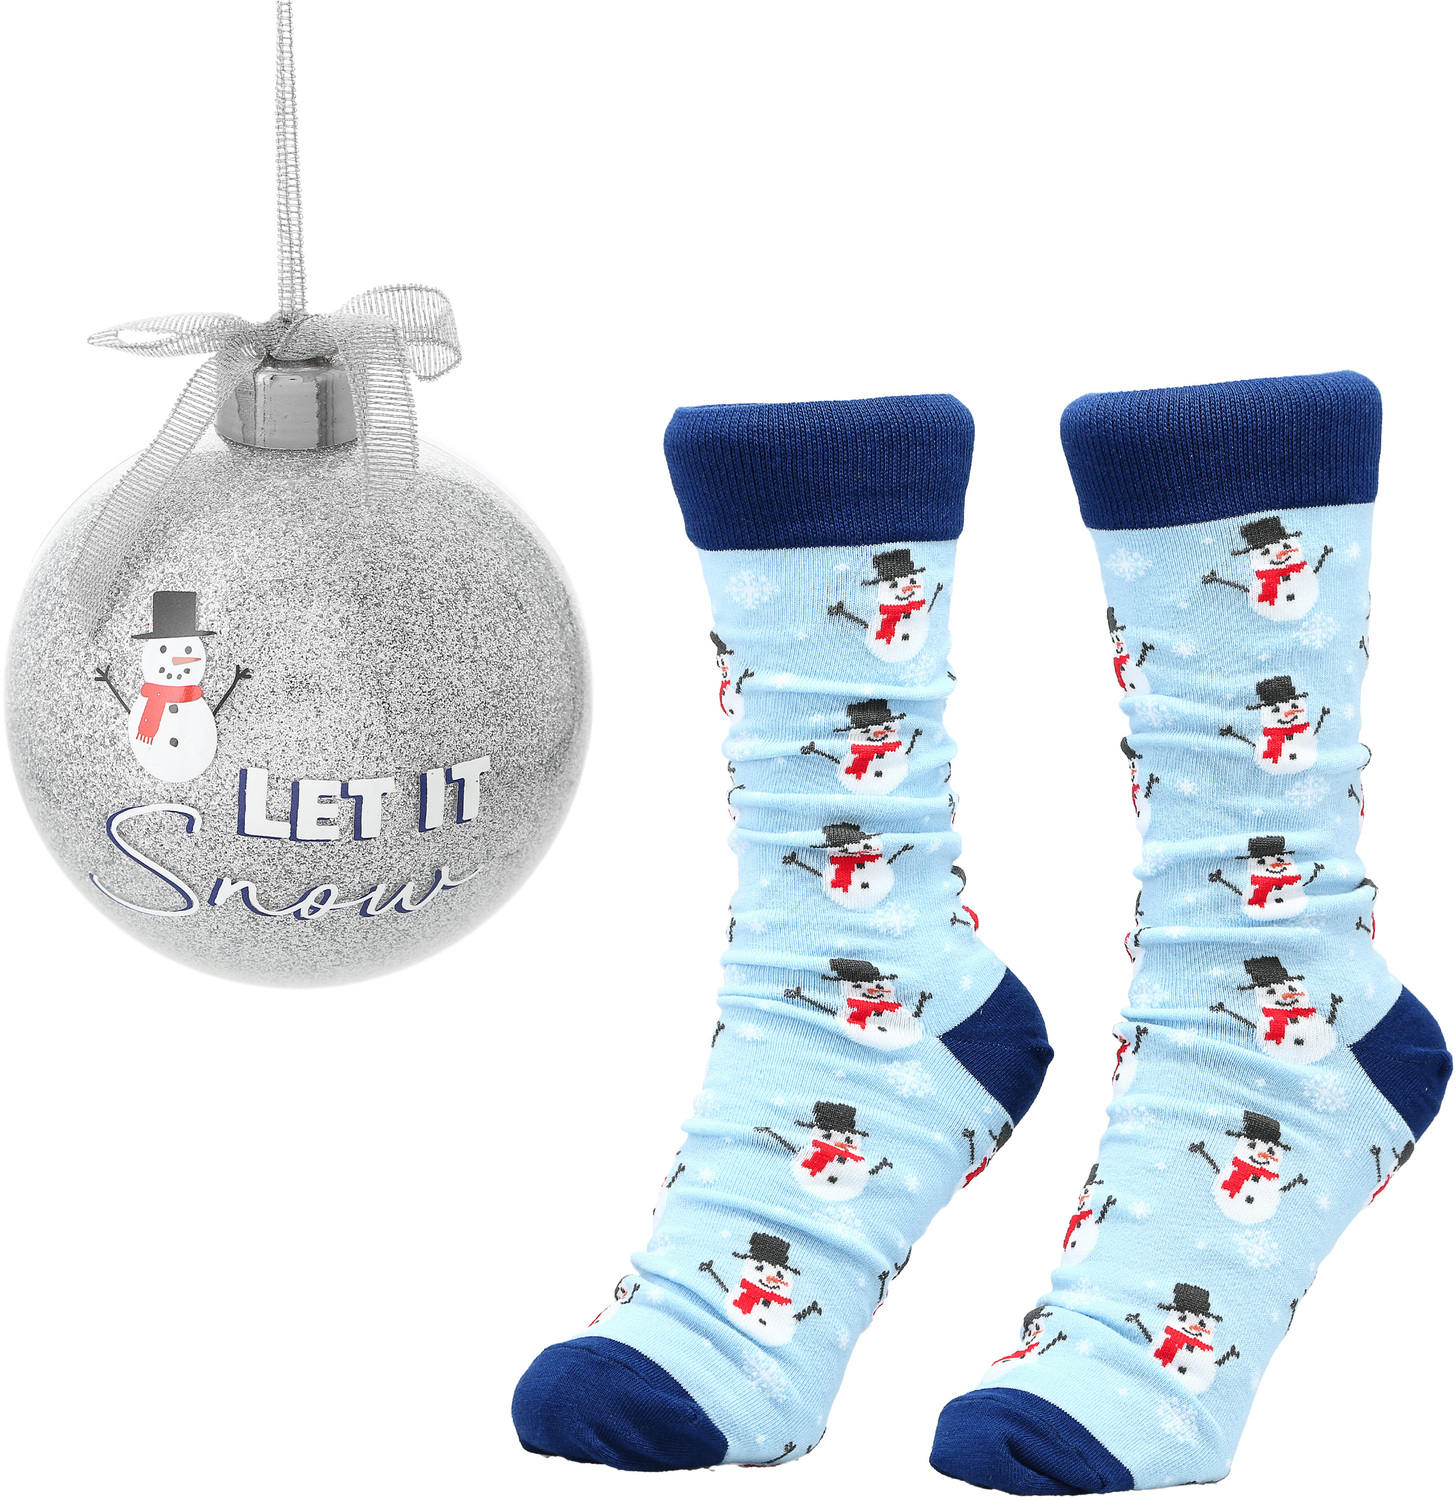 Let it Snow by Warm & Toe-sty - Let it Snow - 4" Ornament with Unisex Holiday Socks